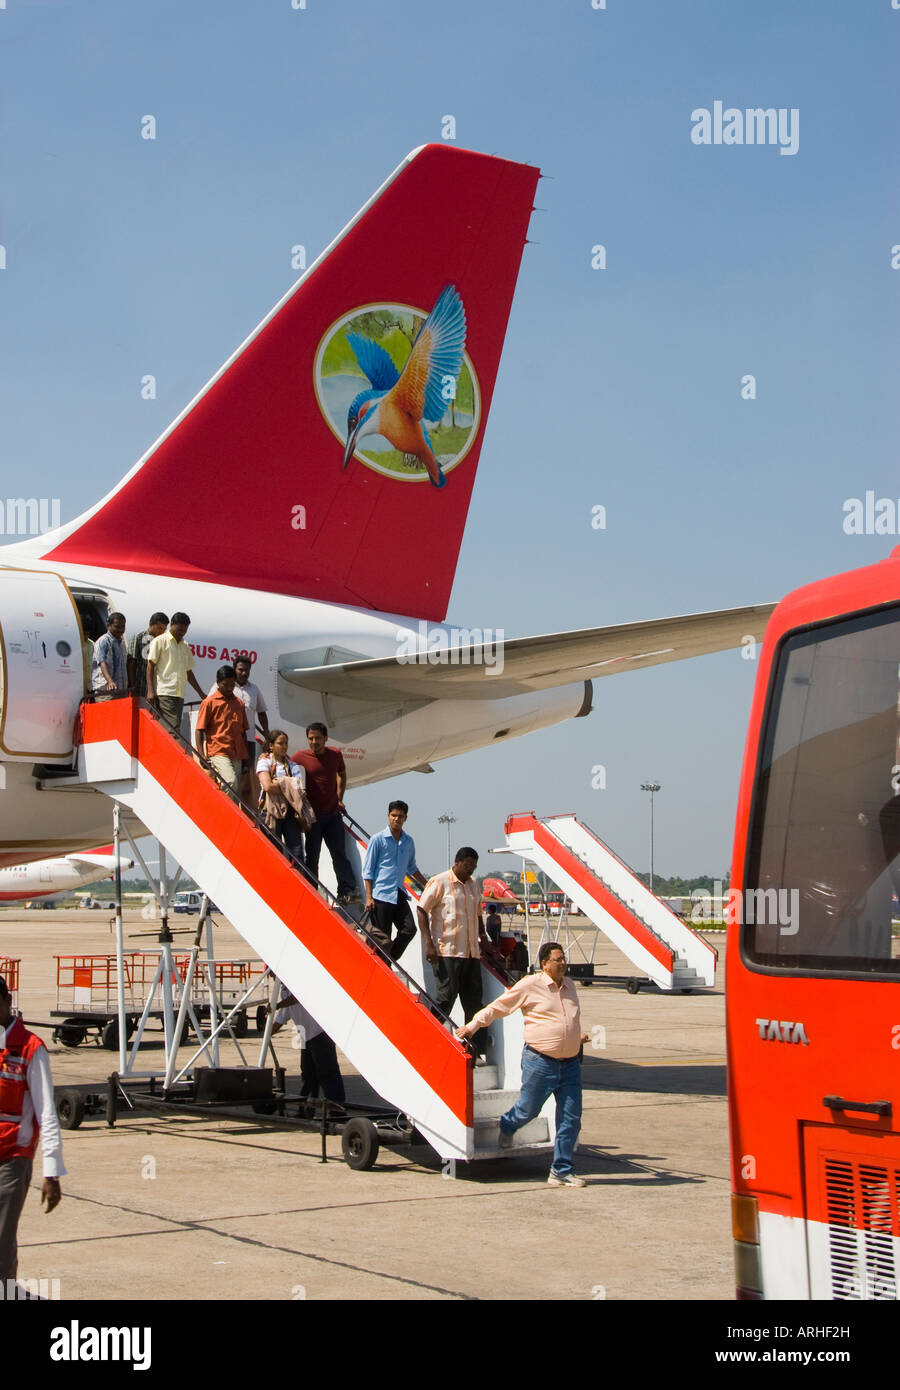 Indian passengers leaving a jet at an airport in India Stock Photo